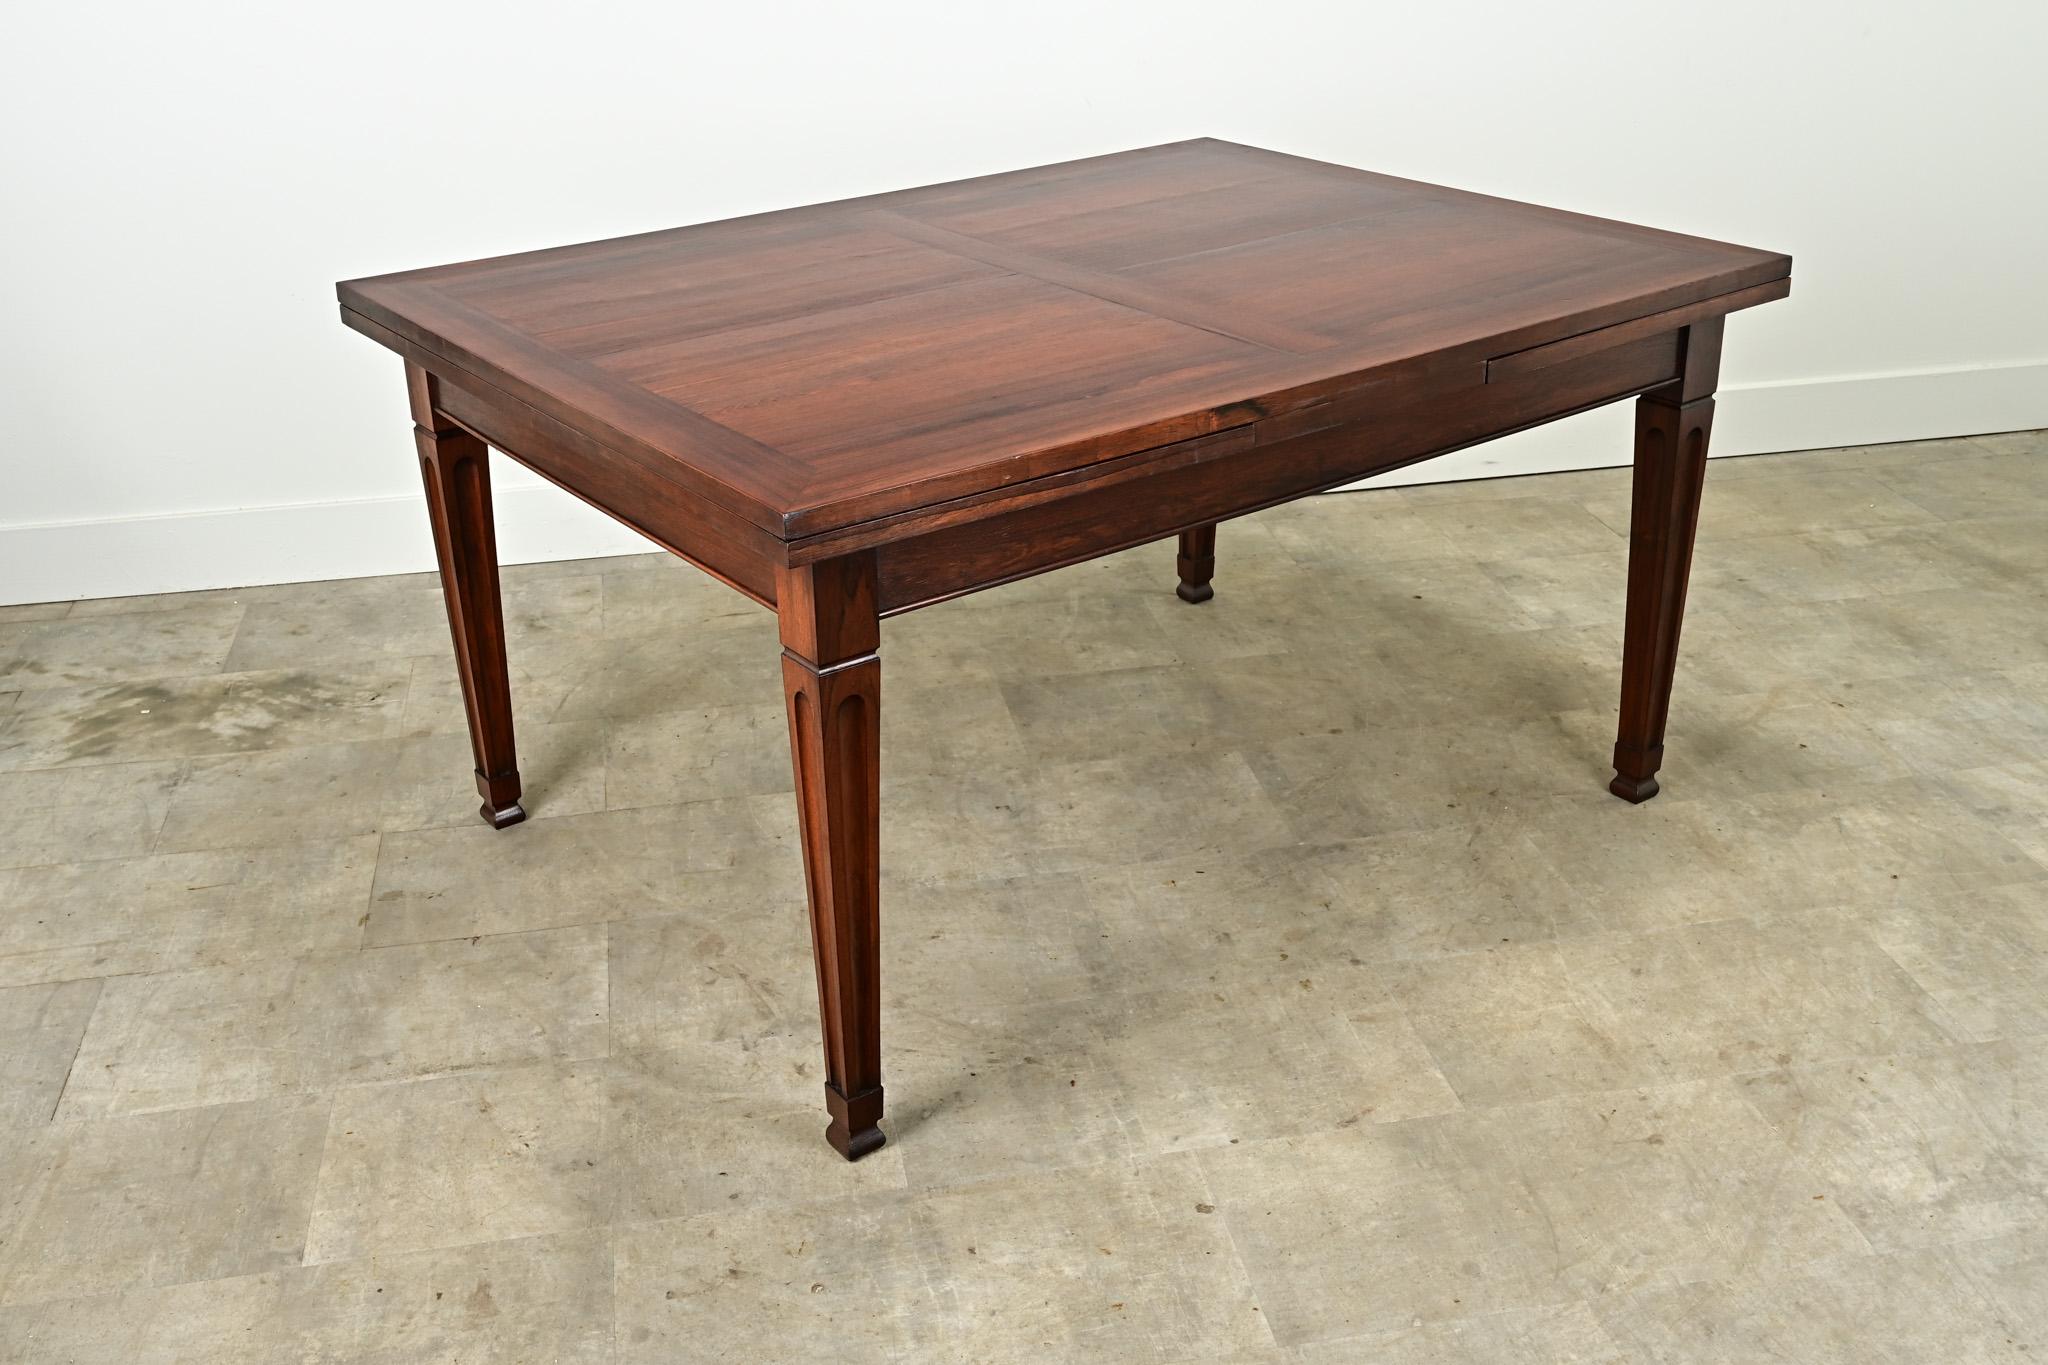 This rosewood extending dining table has self storing leaves making for a versatile dining table. This table easily seats six guests while closed and opens to seat up to ten. Cleaned and professionally refinished this table is ready for your